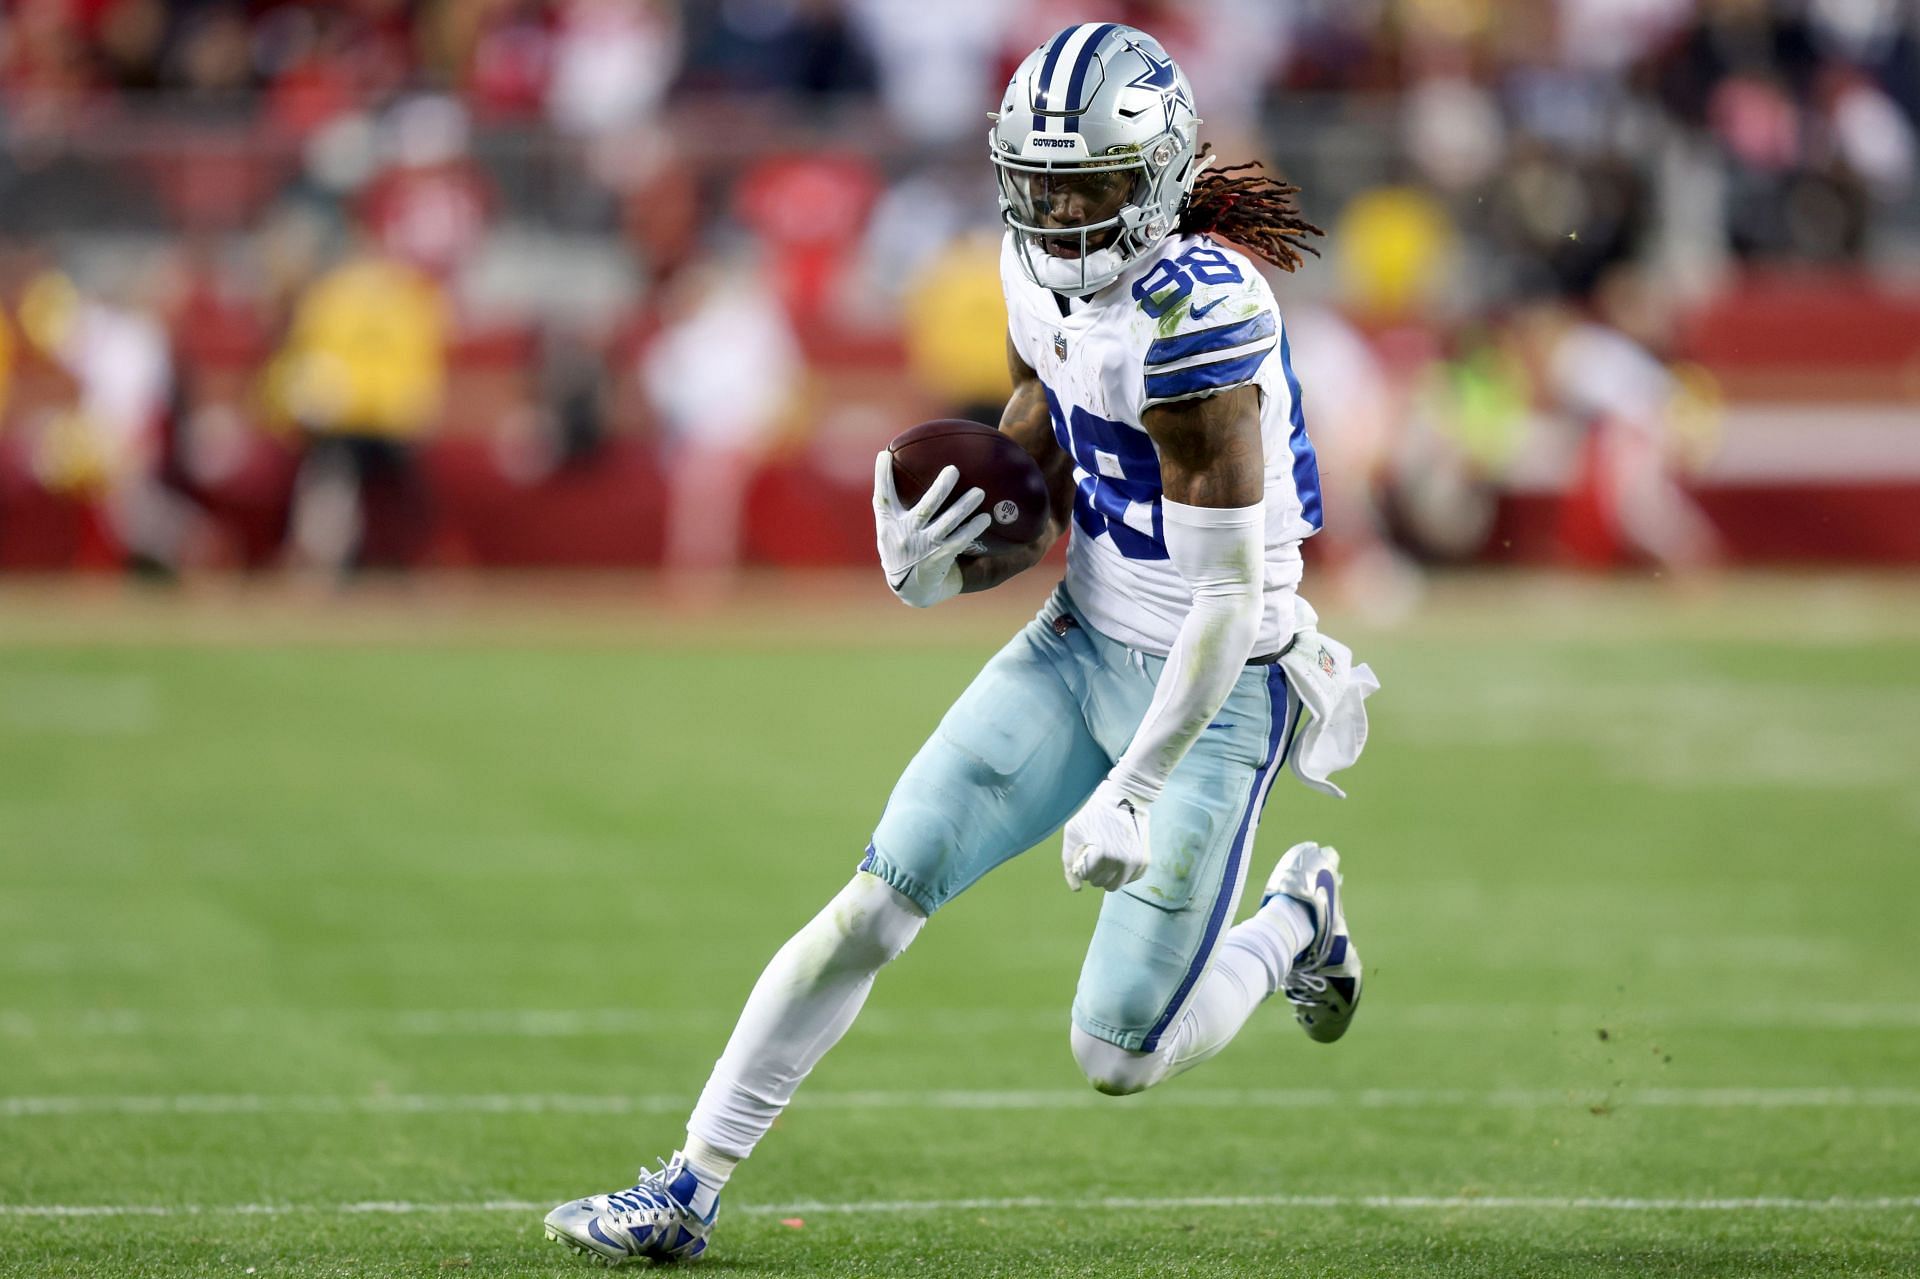 Sources: Cowboys add $7.1 million in salary cap space by